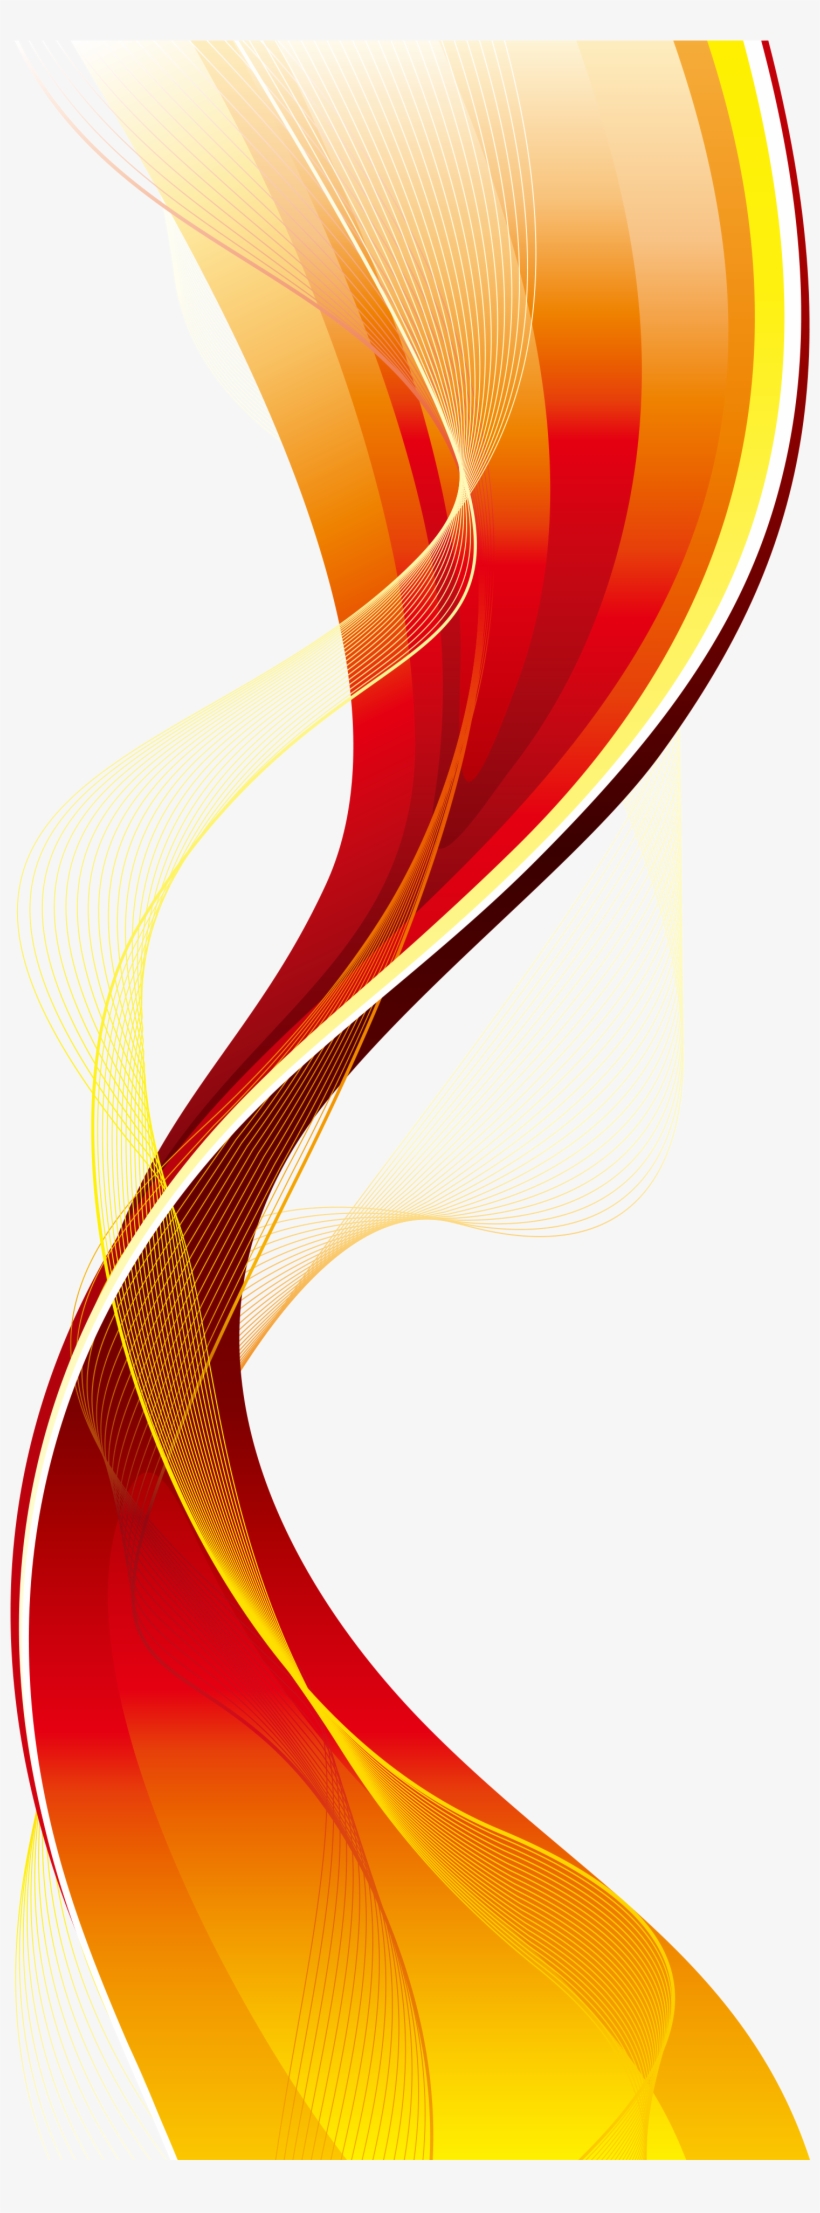 Curve Graphic Design Red - Background Vector Png, transparent png #2458589